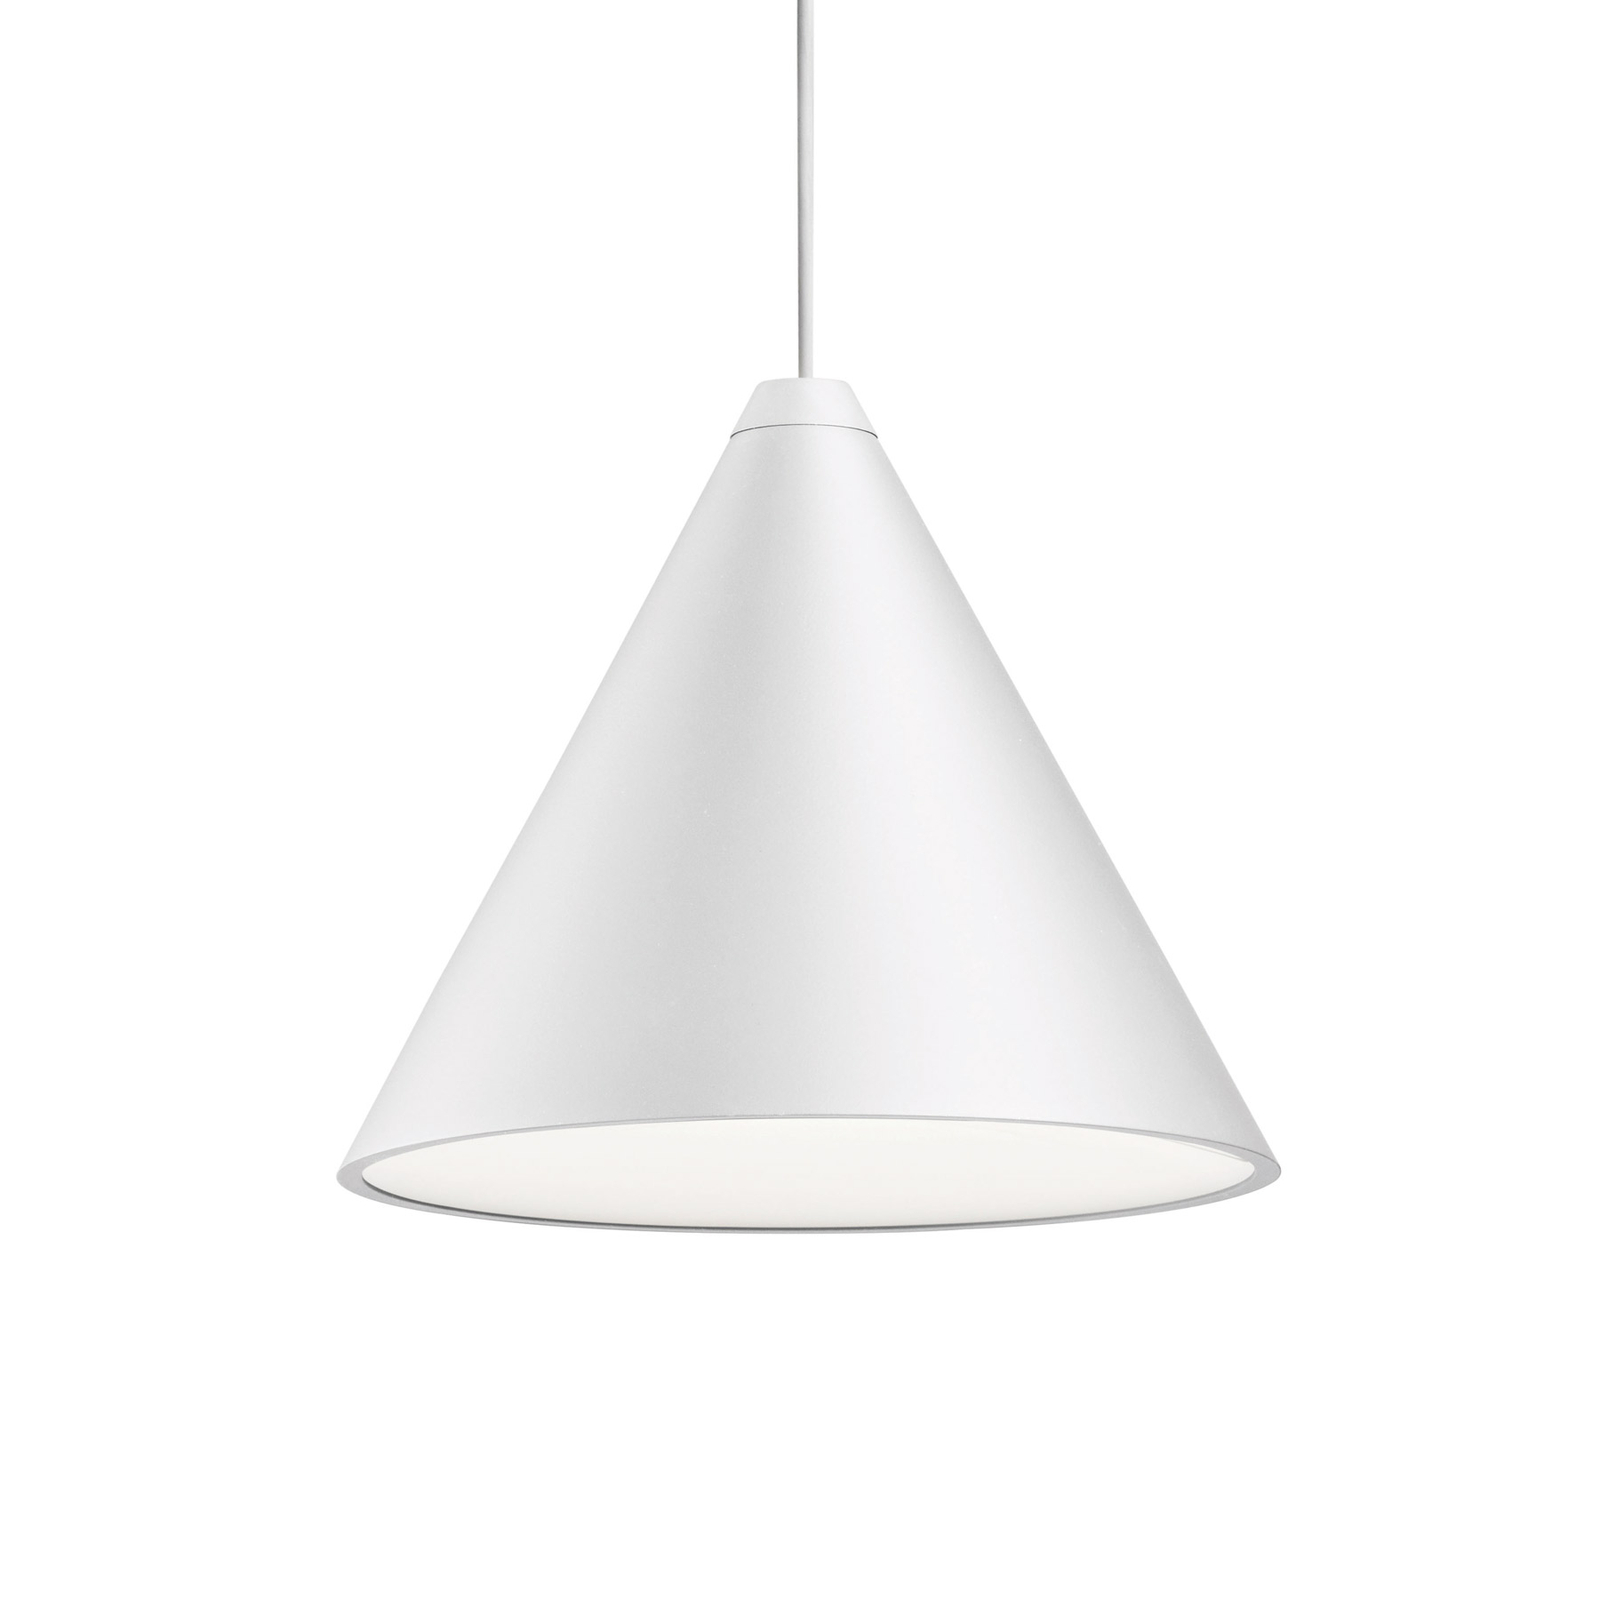 FLOS String Light Cone hanging light white 12m Touch